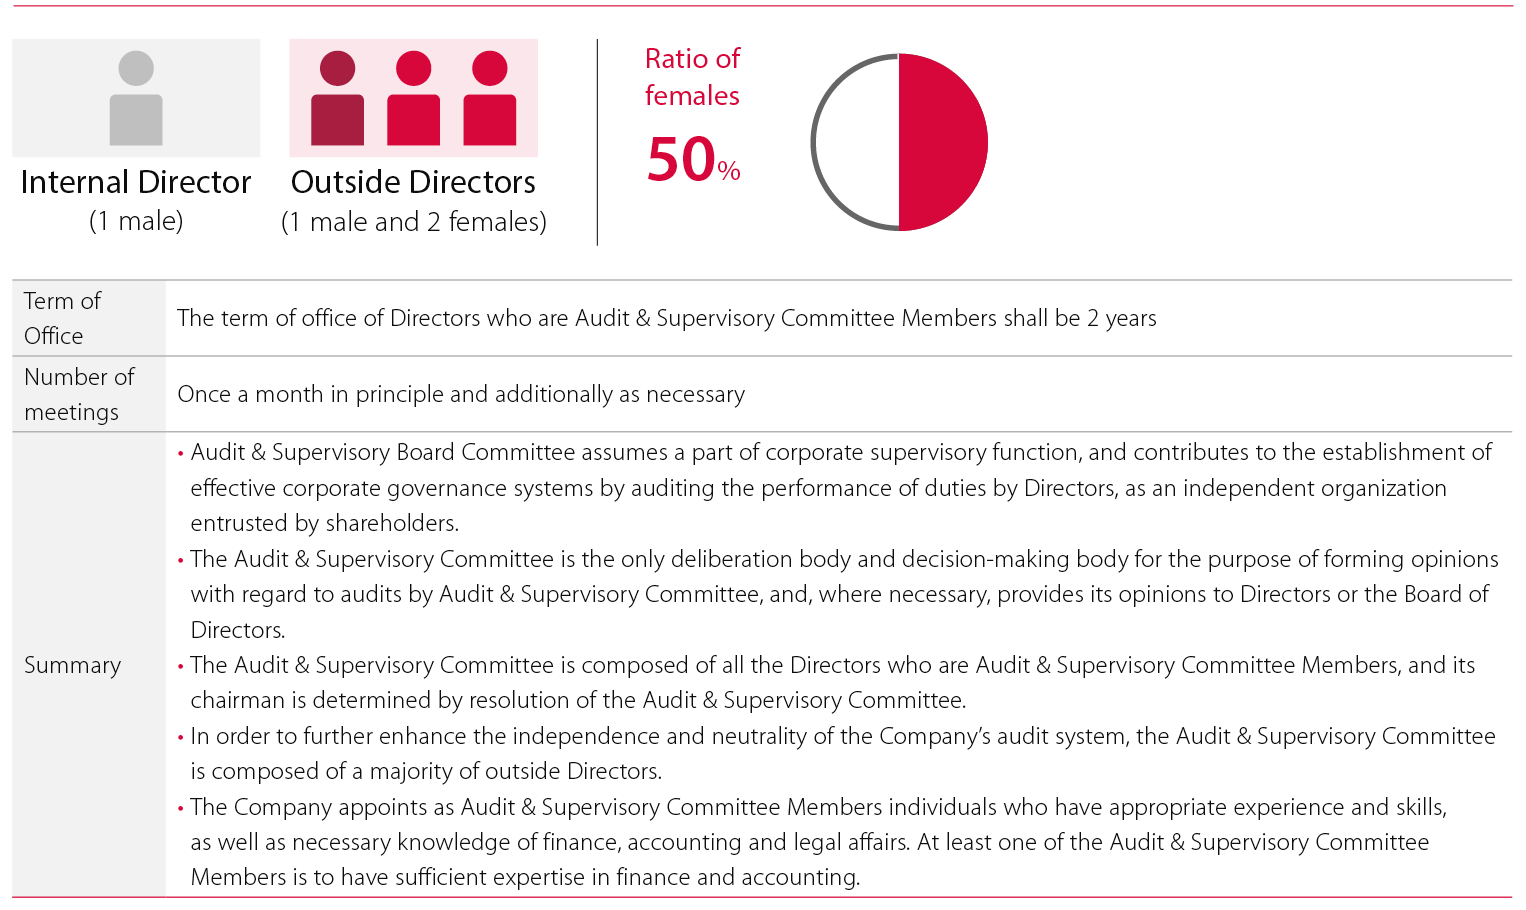 Audit & Supervisory Committee